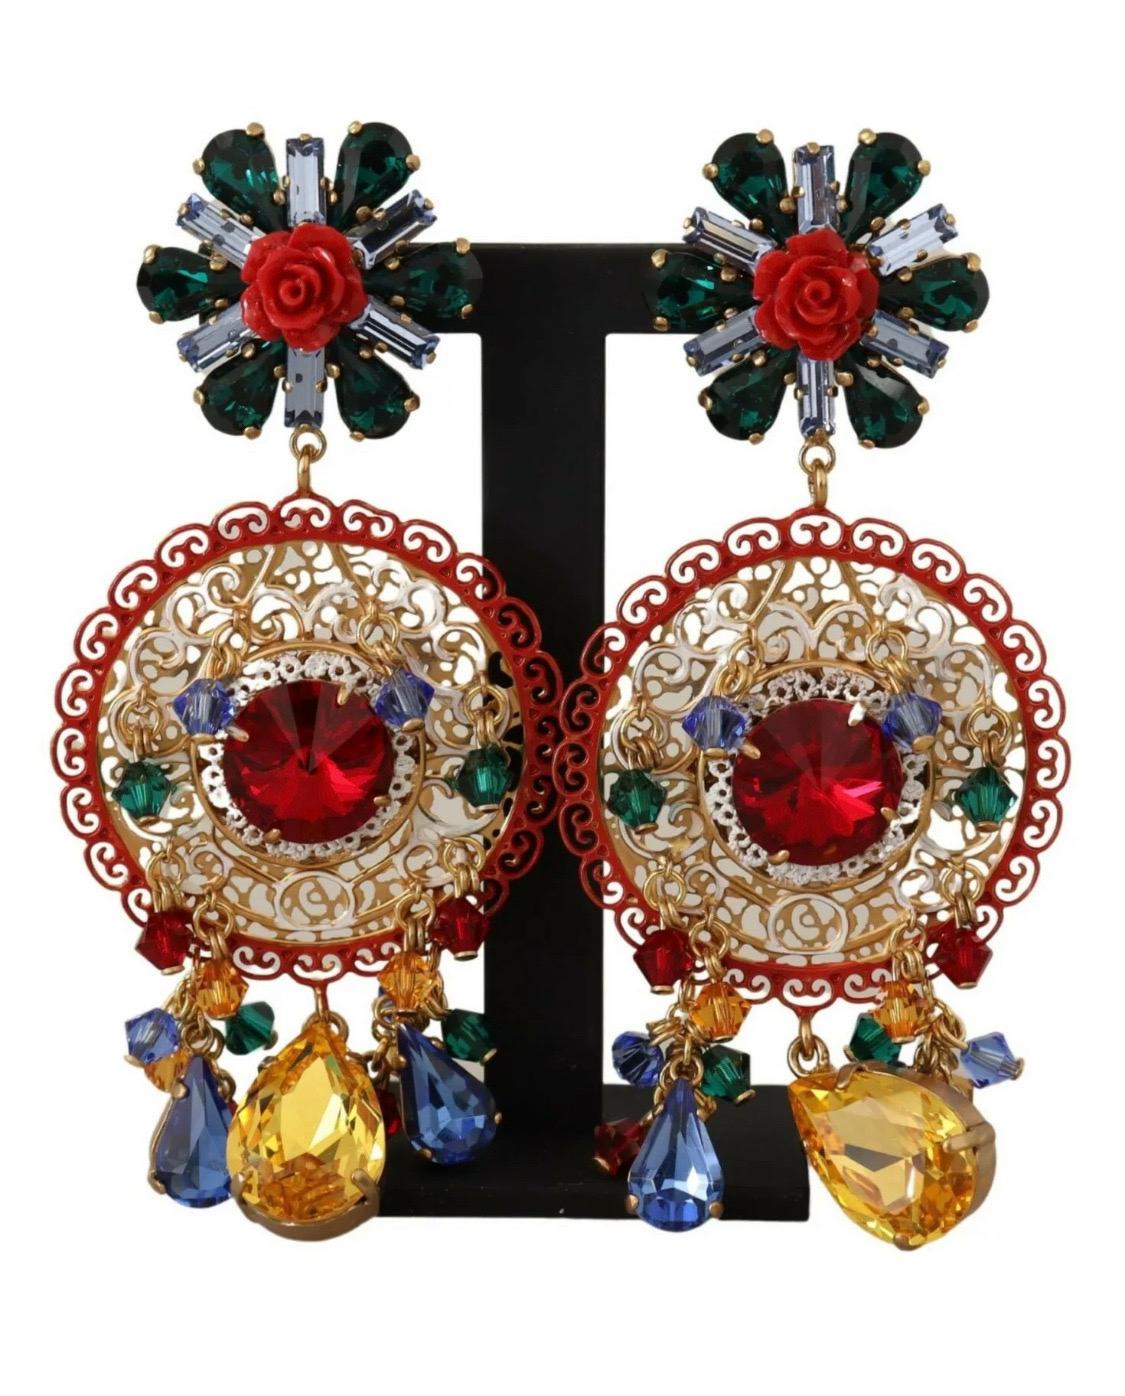 DOLCE & GABBANA

Gorgeous brand new with tags, 100% Authentic Dolce & Gabbana earrings.

Model: Clip-on, dangling
Motive: Carretto
Material: 60% Brass, 30% Glass, 10% Resin
Color: Gold with multicolor crystals
Logo details
Made in Italy

Length: